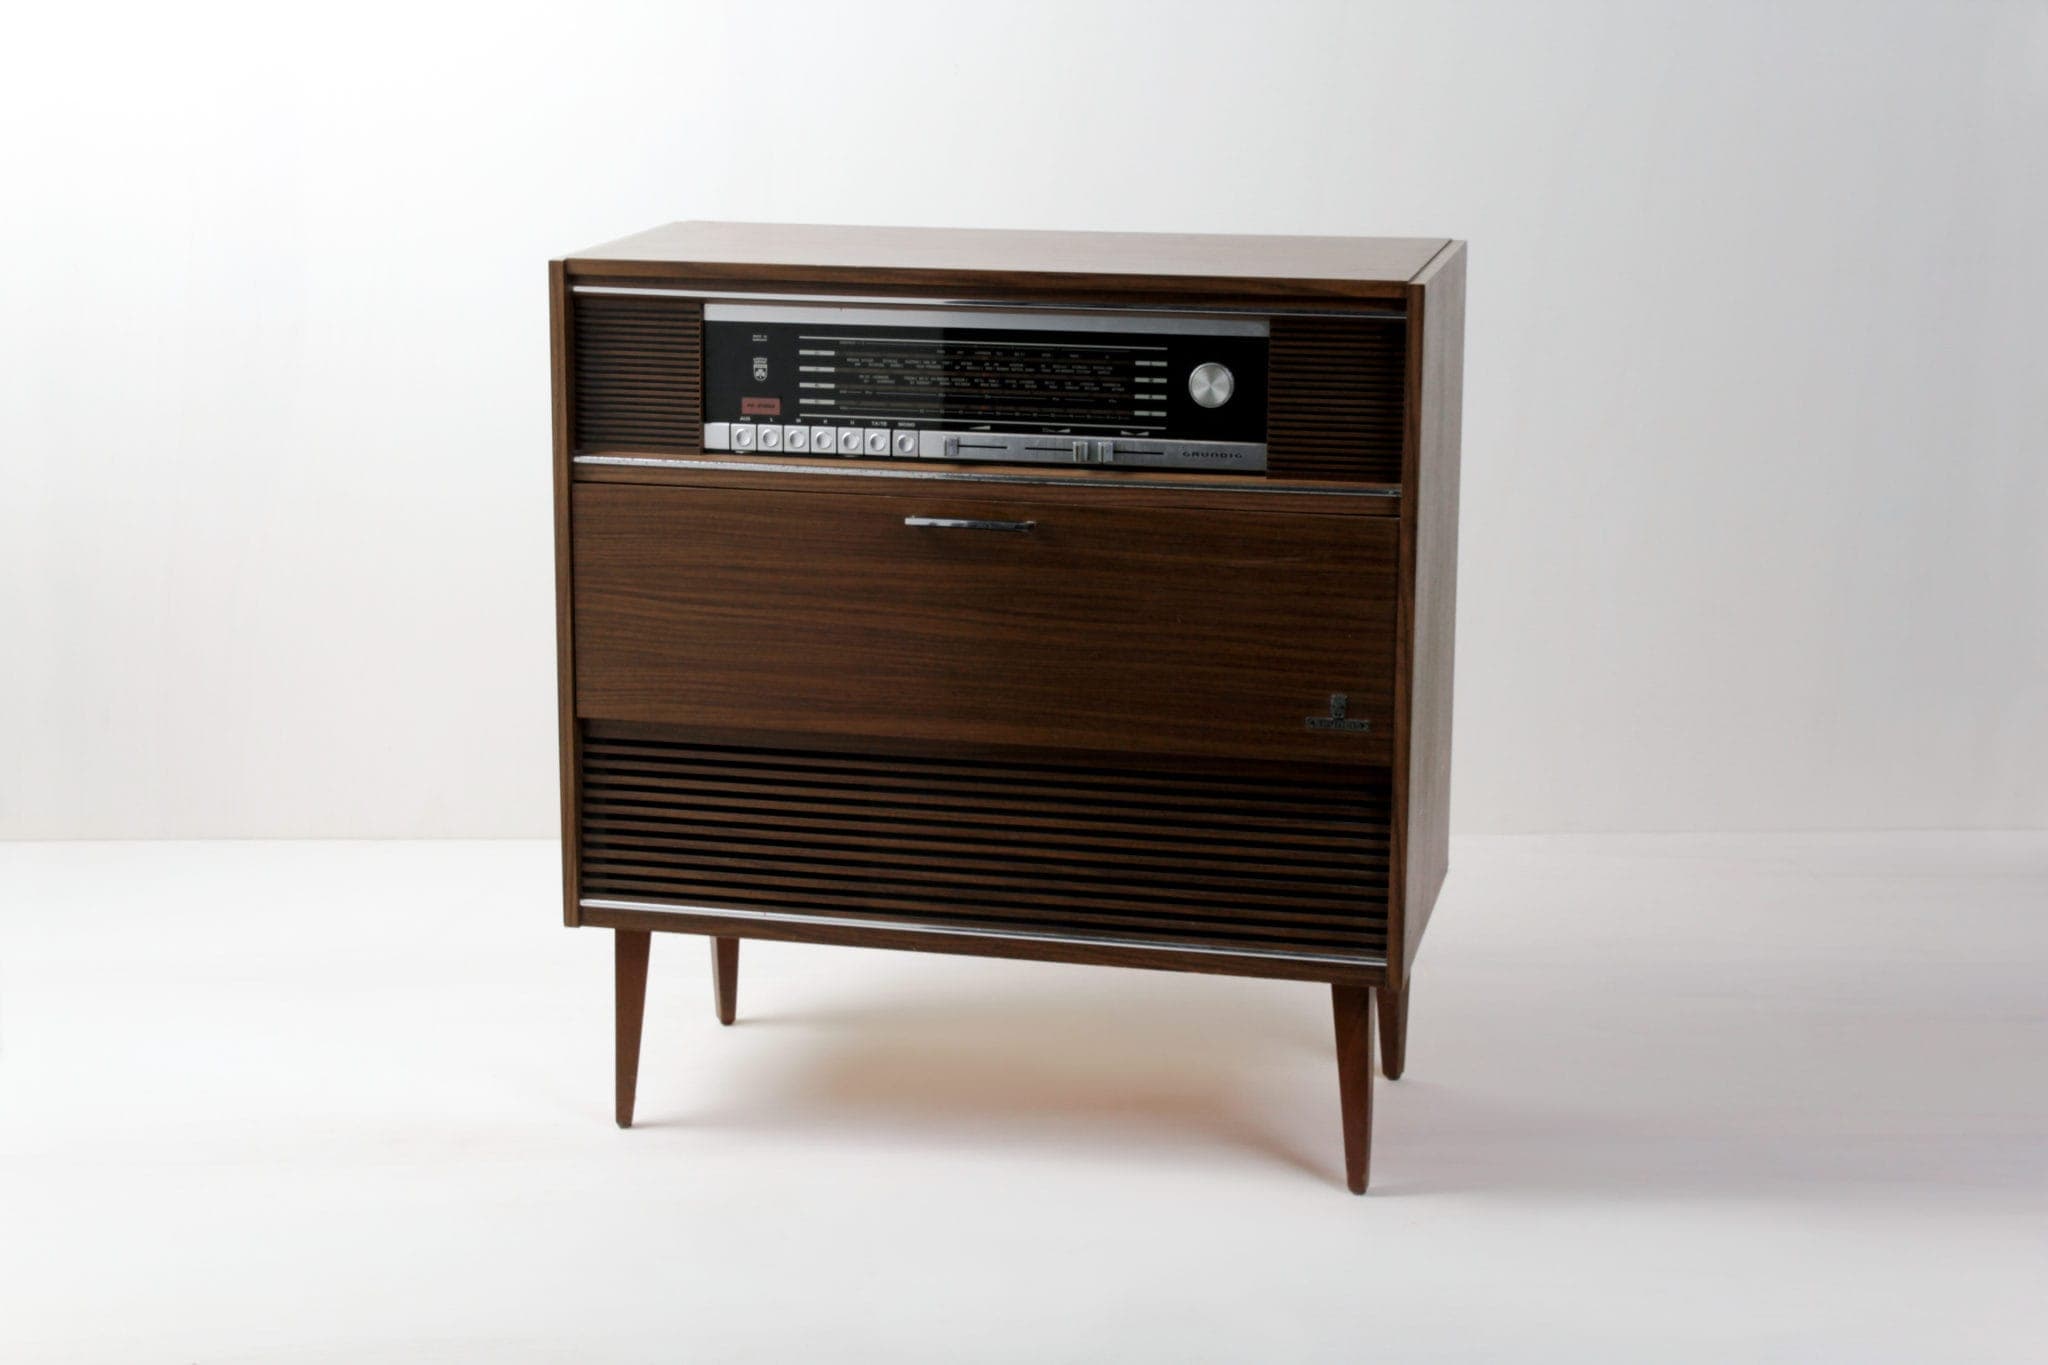 Radiogram Bartolome | An elegant radiogram from the 1970s. Bartolome is made of dark wood and a real gem not only for music lovers. Staged beautifully, the radiogram is an impressive decorative element. Would you like to rent other unusual decorative elements? We have many interesting design elements in our range. | gotvintage Rental & Event Design